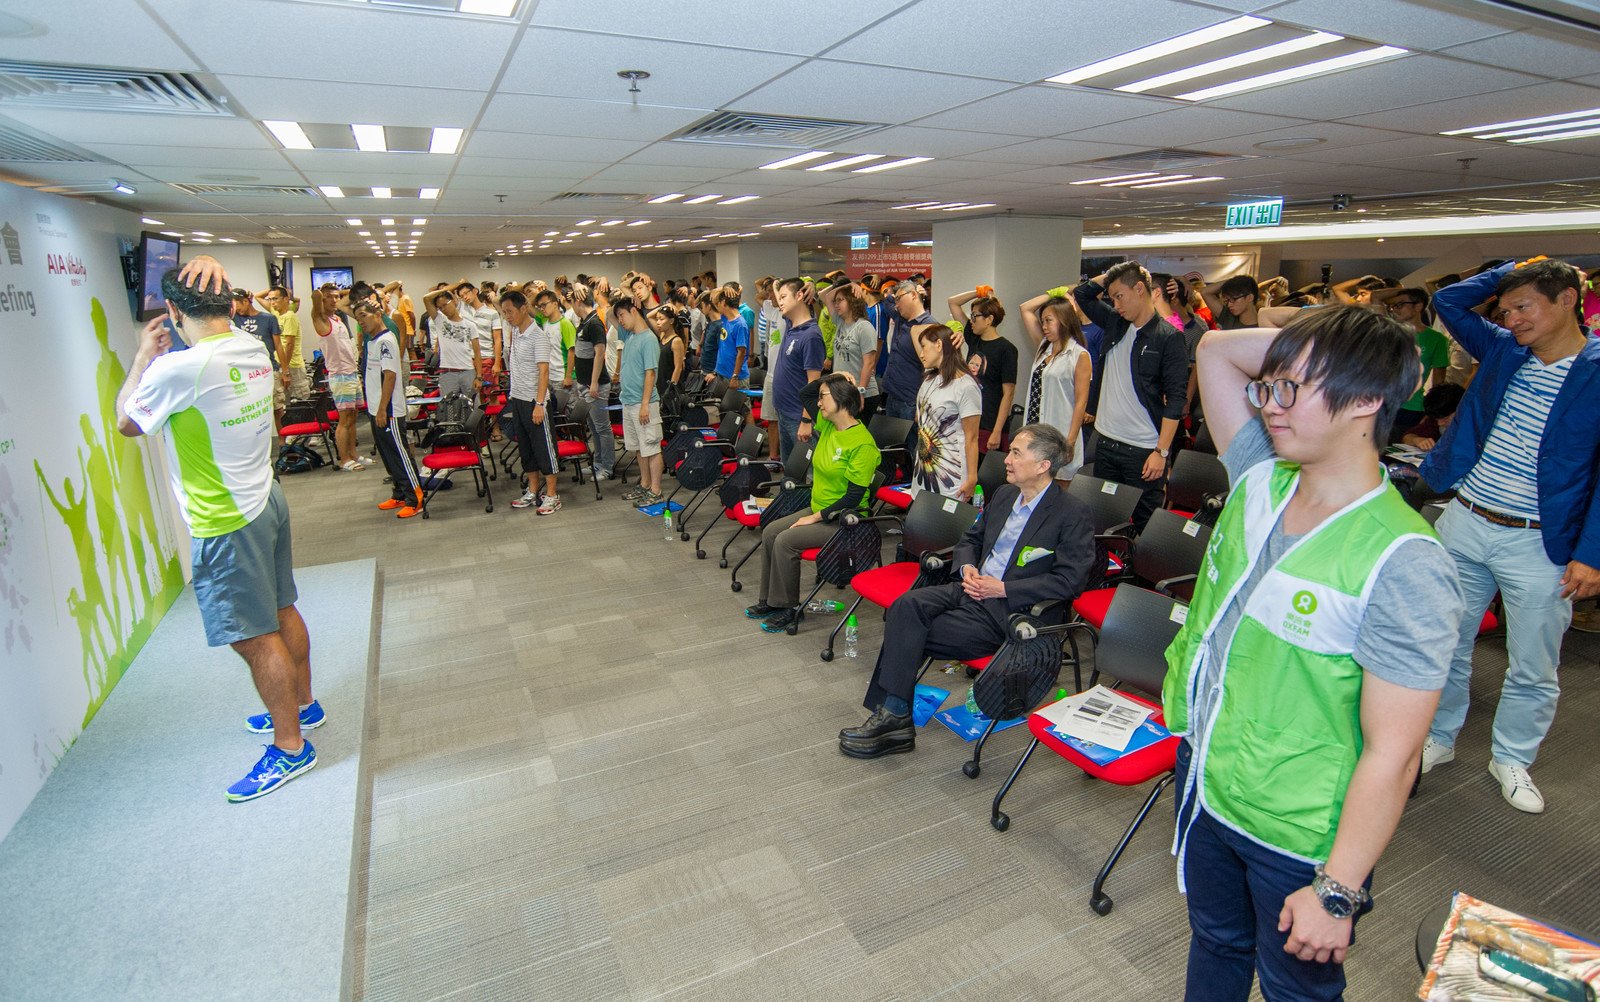 Over 300 walkers attended the Oxfam Trailwalker 2015 briefing and practiced warm-up exercises.